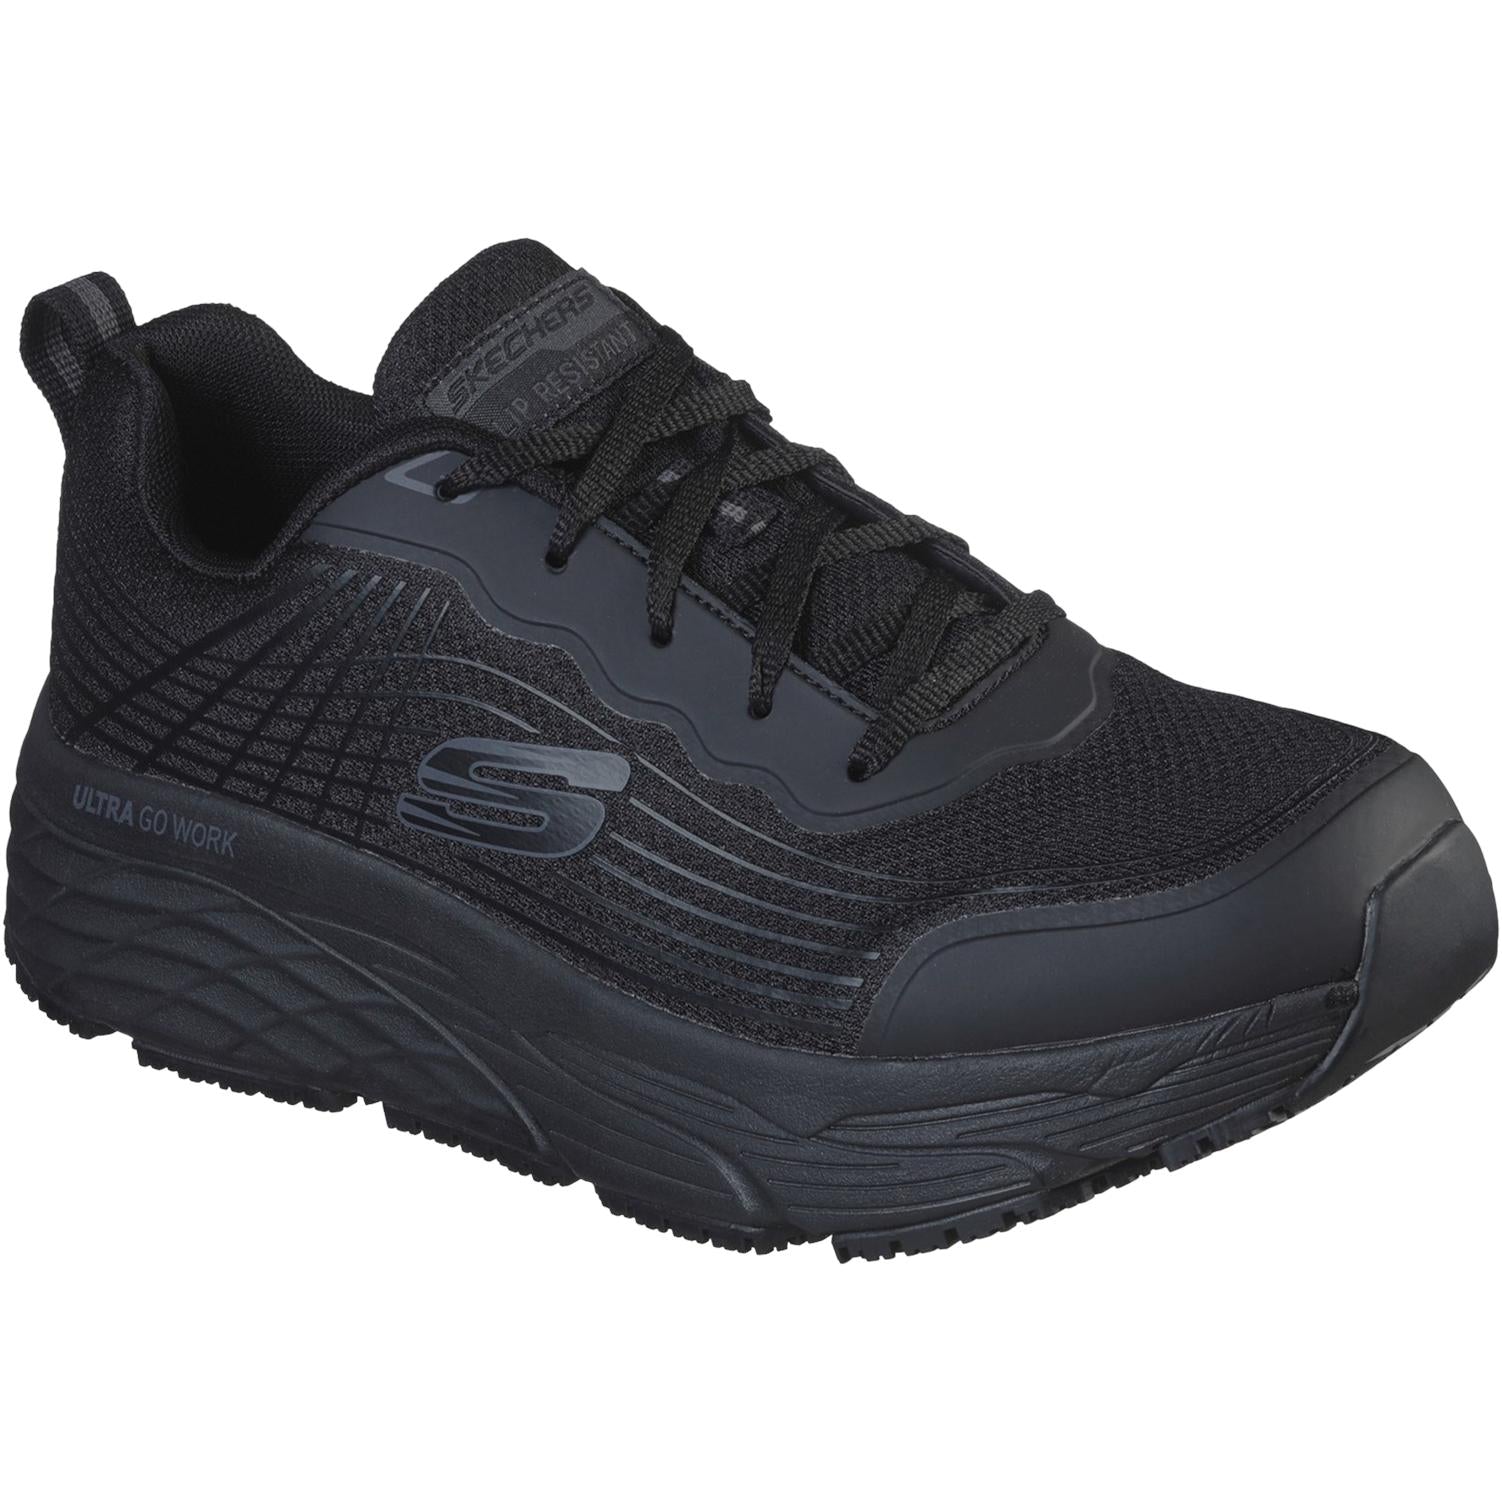 Skechers Skechers Work Relaxed Fit Max Cushioning Elite Trainer